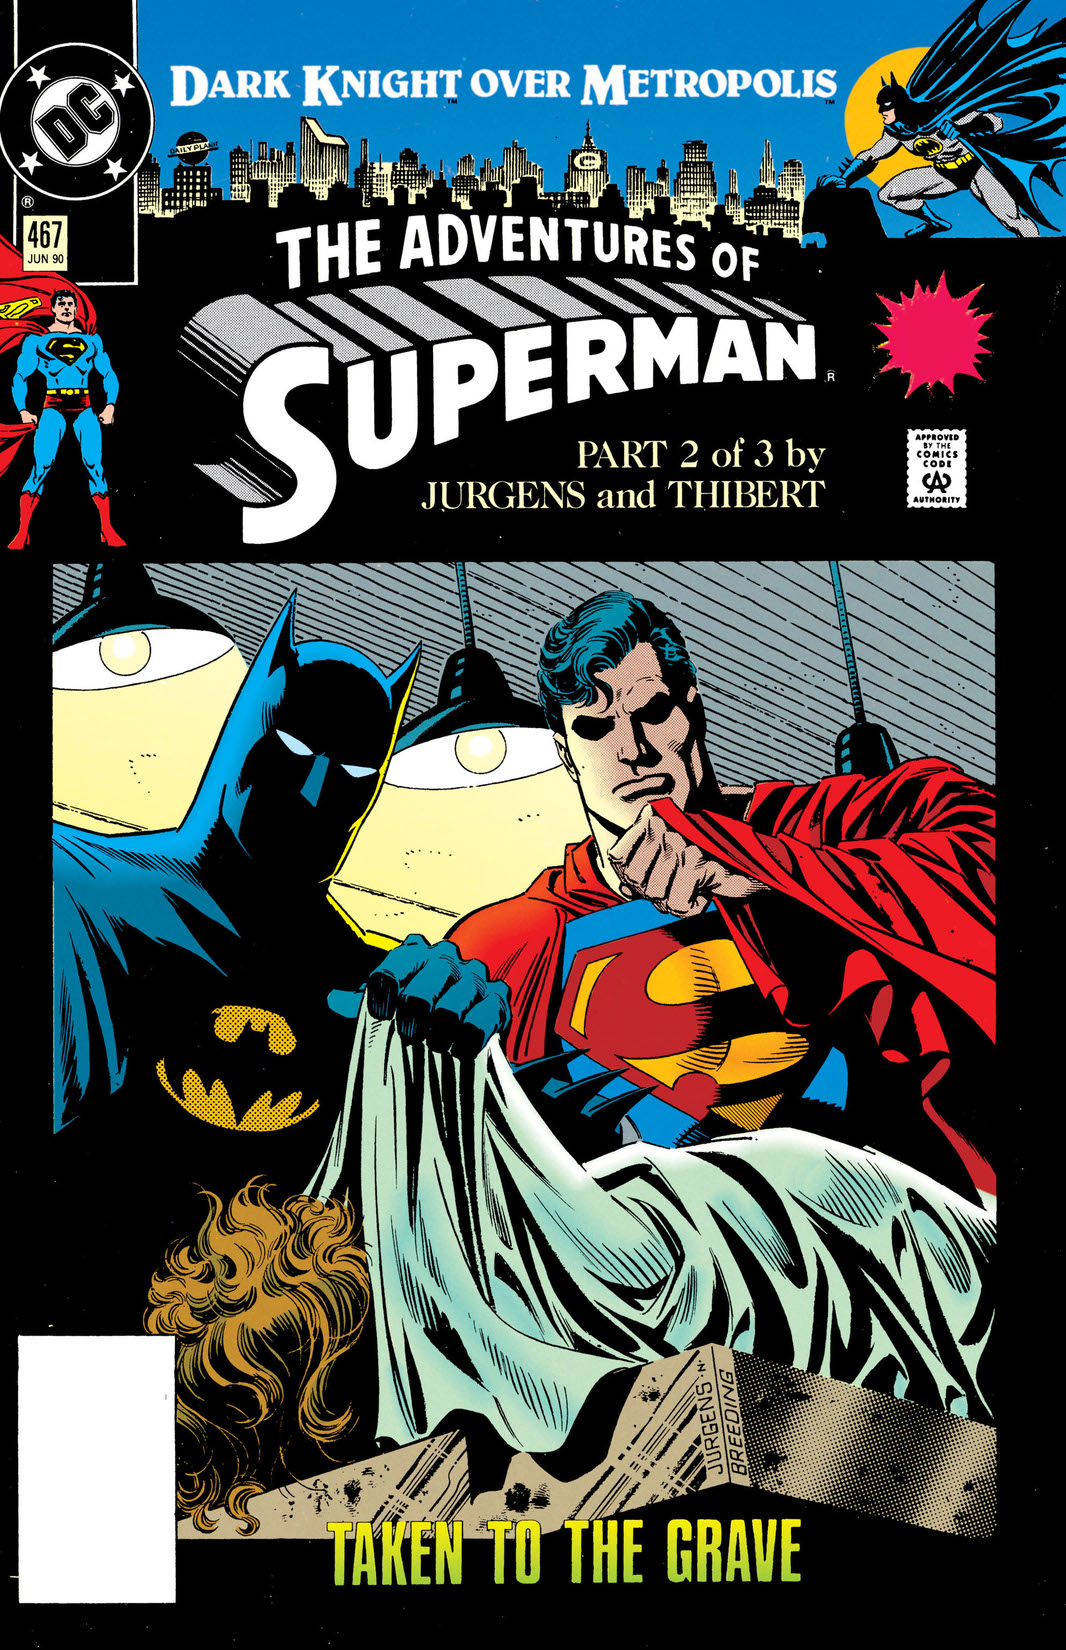 Adventures of Superman (1987-2006) #467 preview images